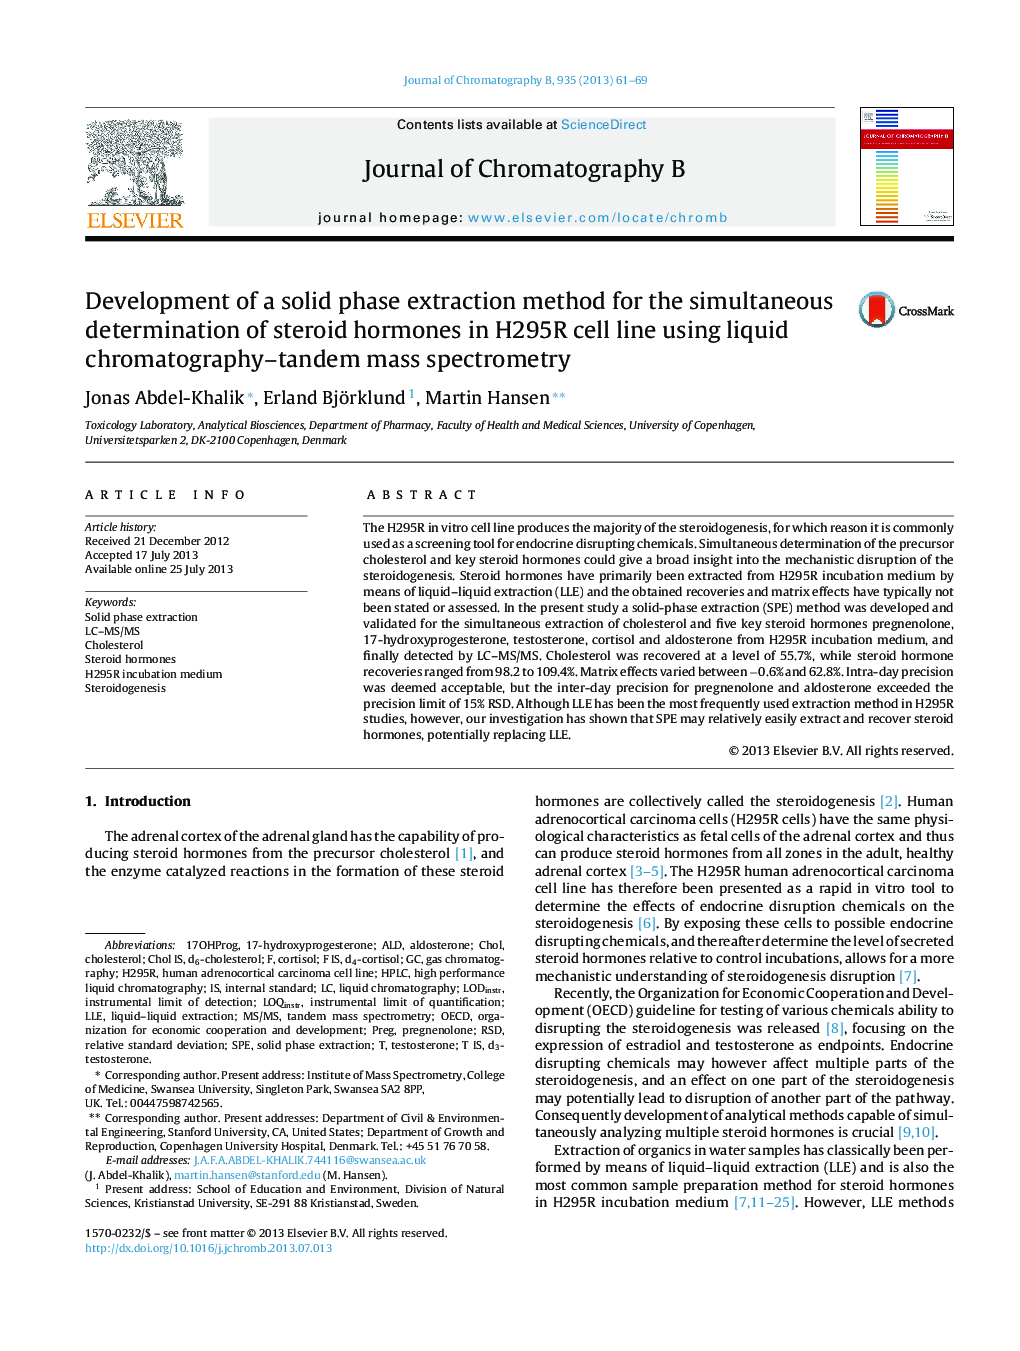 Development of a solid phase extraction method for the simultaneous determination of steroid hormones in H295R cell line using liquid chromatography-tandem mass spectrometry